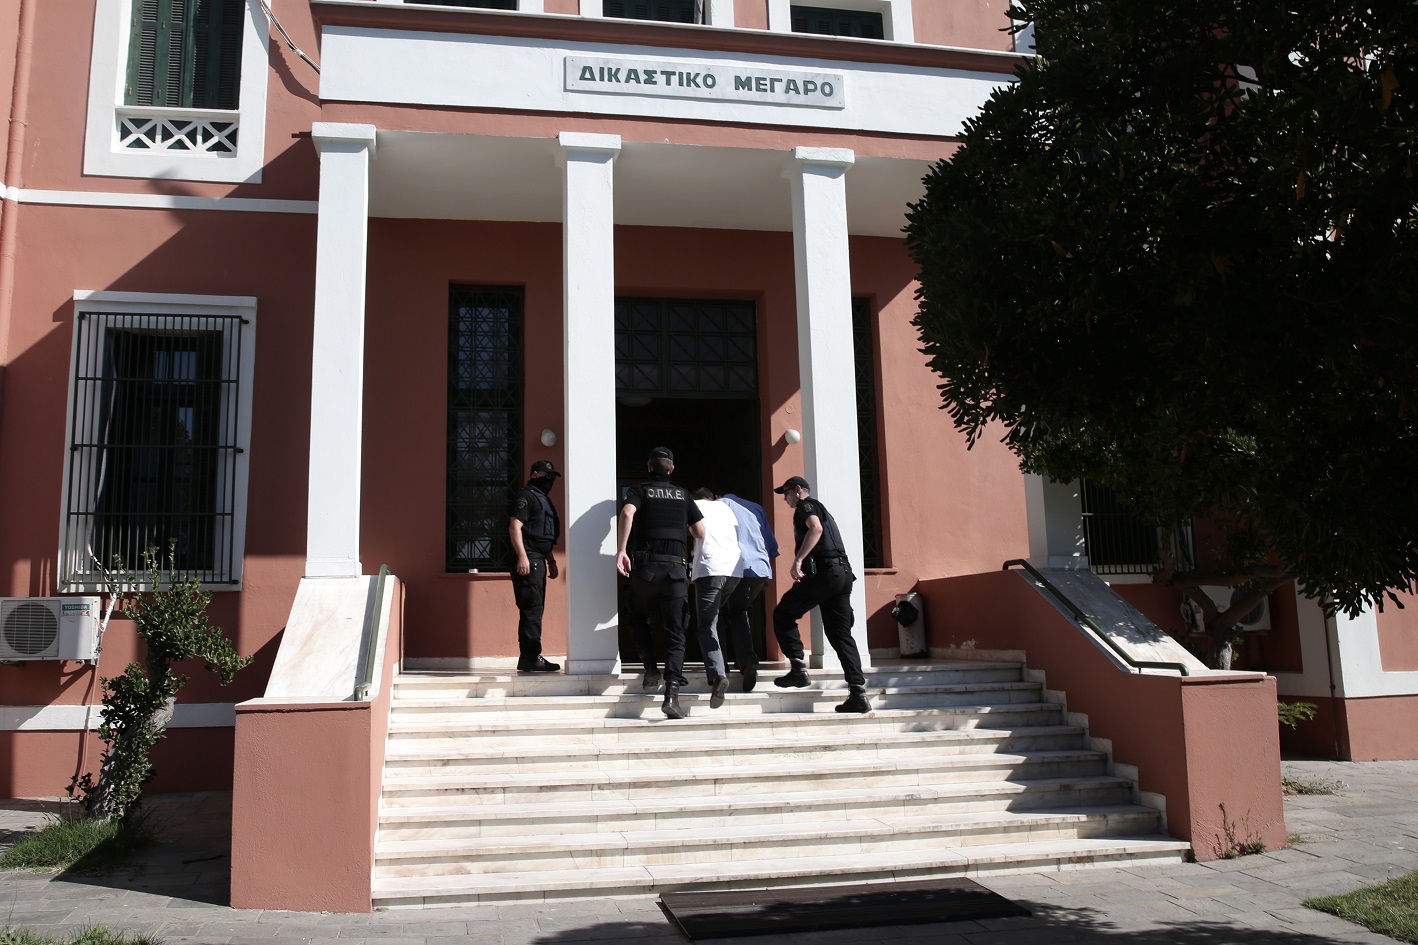 4	Defense lawyers, members of the press and three Turkish lawyers who wanted to be involved in the hearing were also allowed inside the courthouse along with the soldiers.